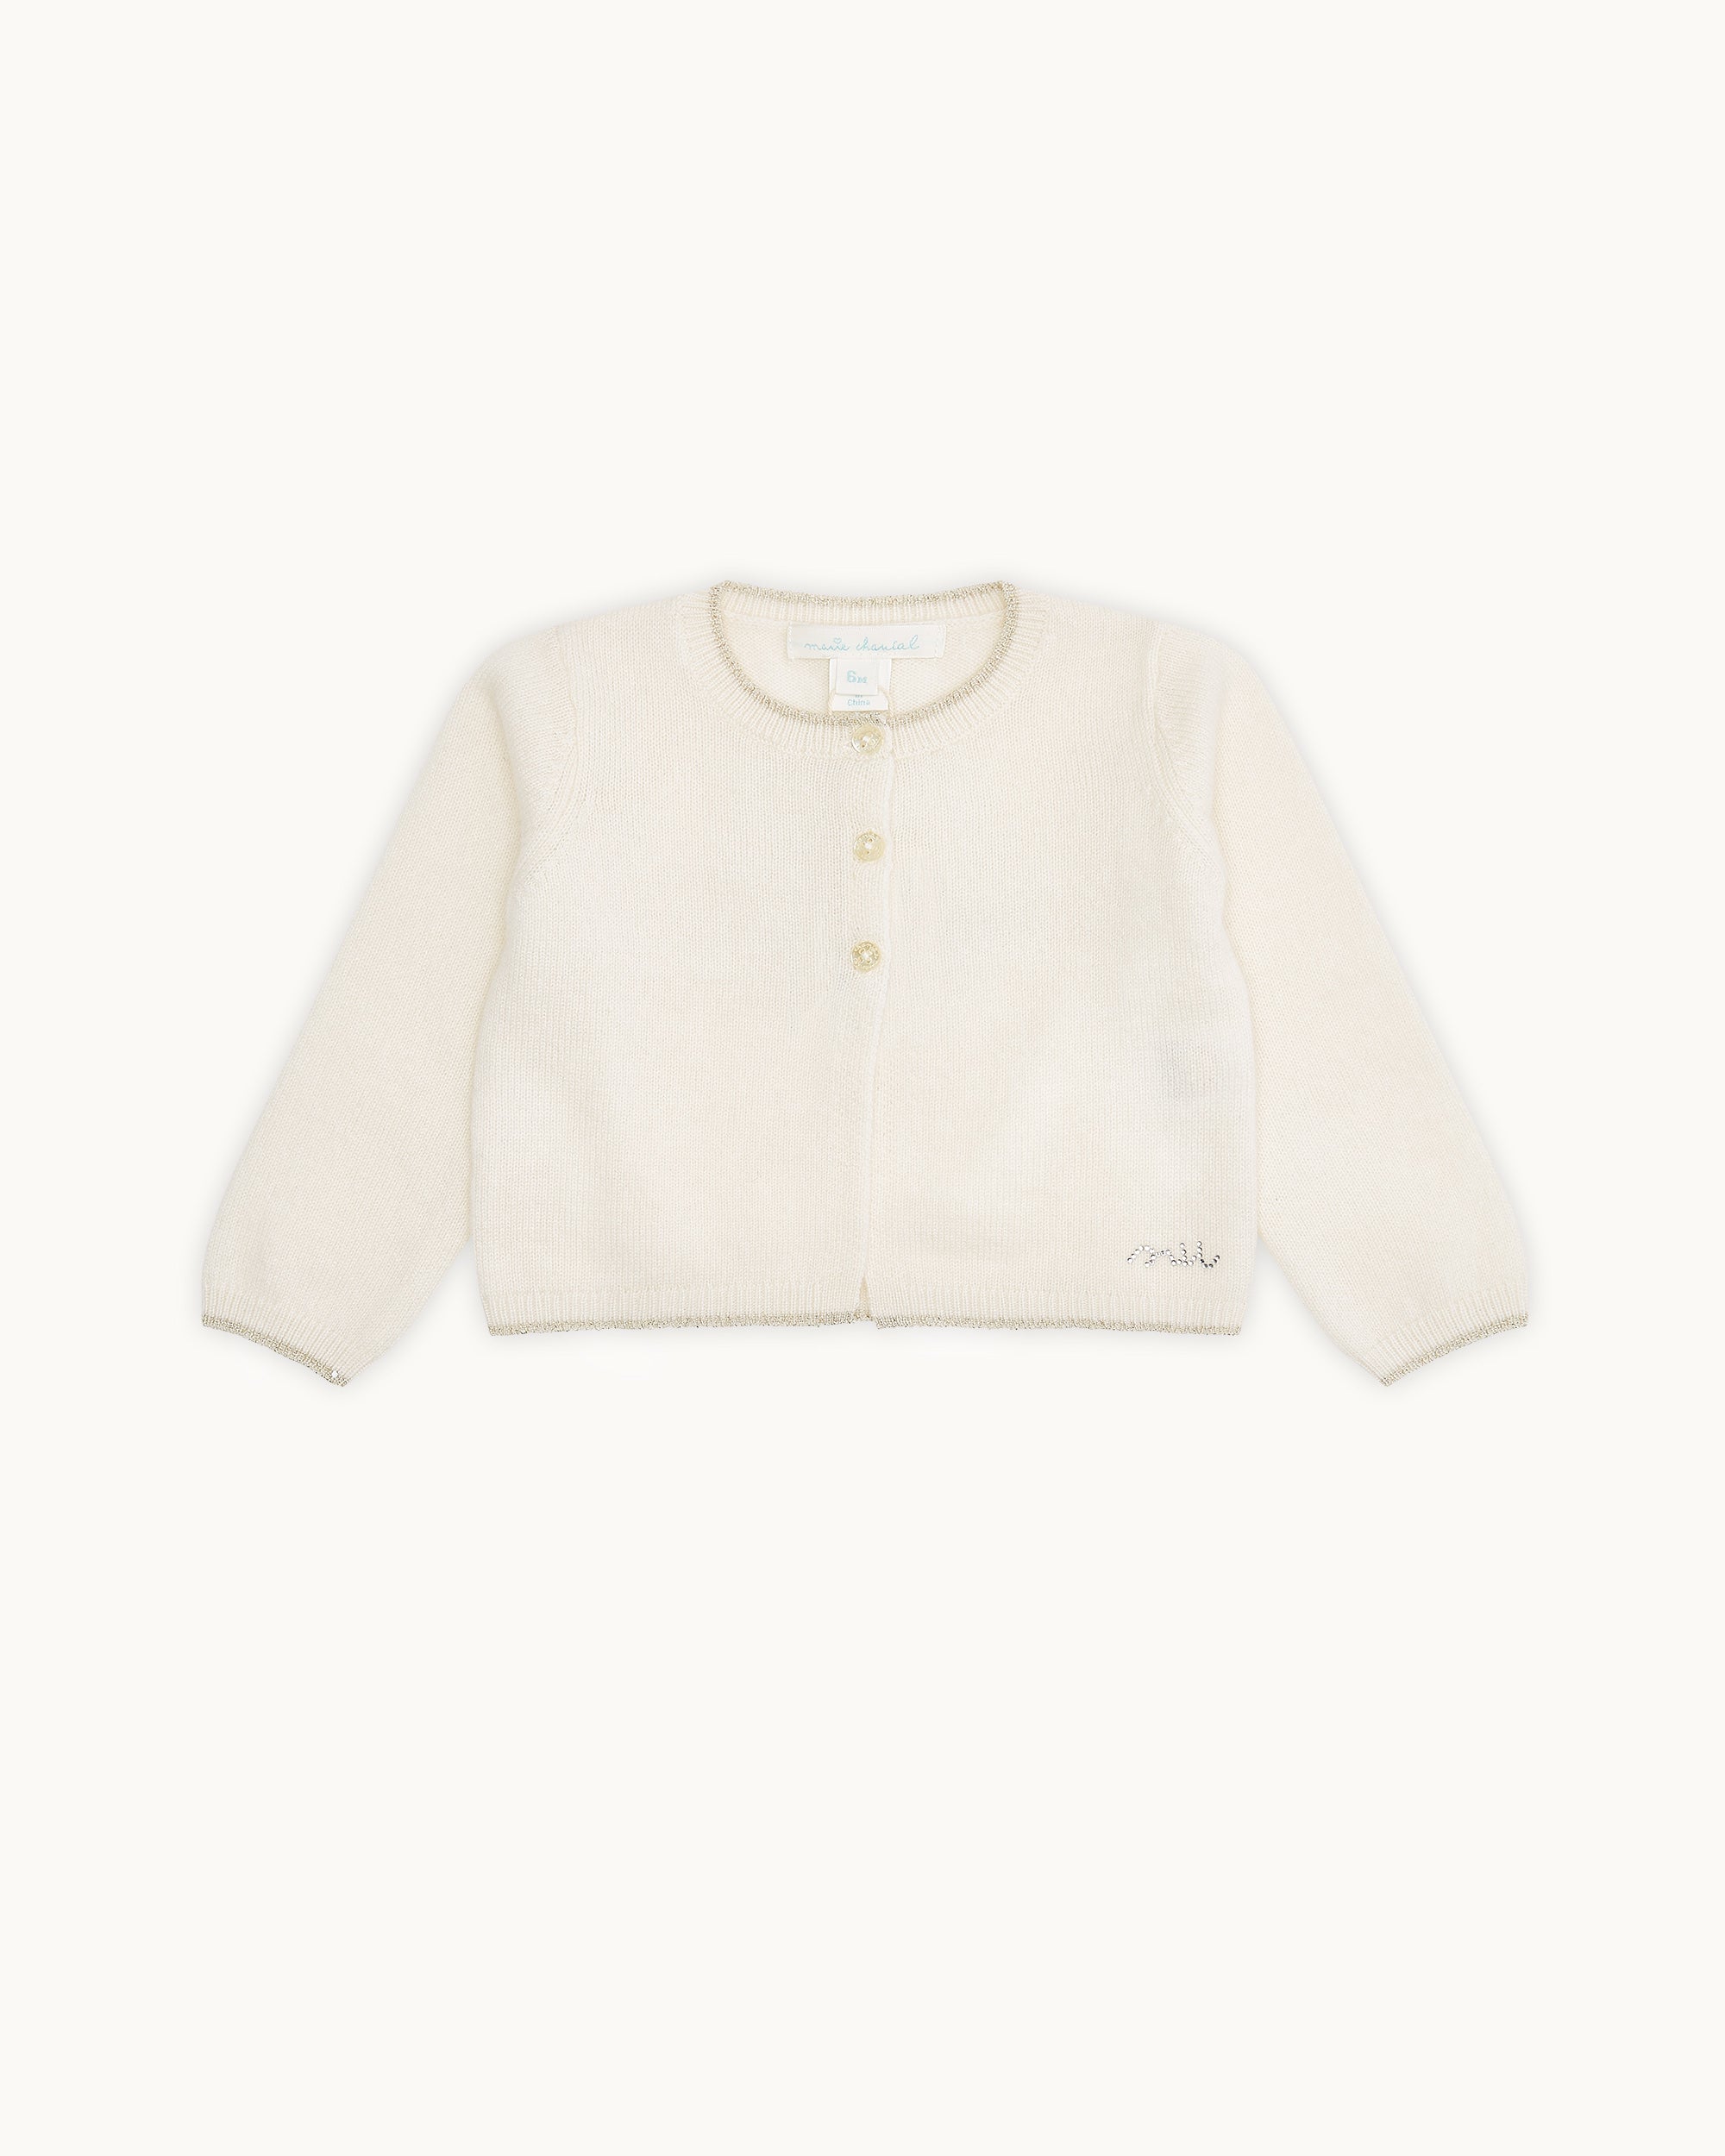 The Little Cashmere Outfit - Cream